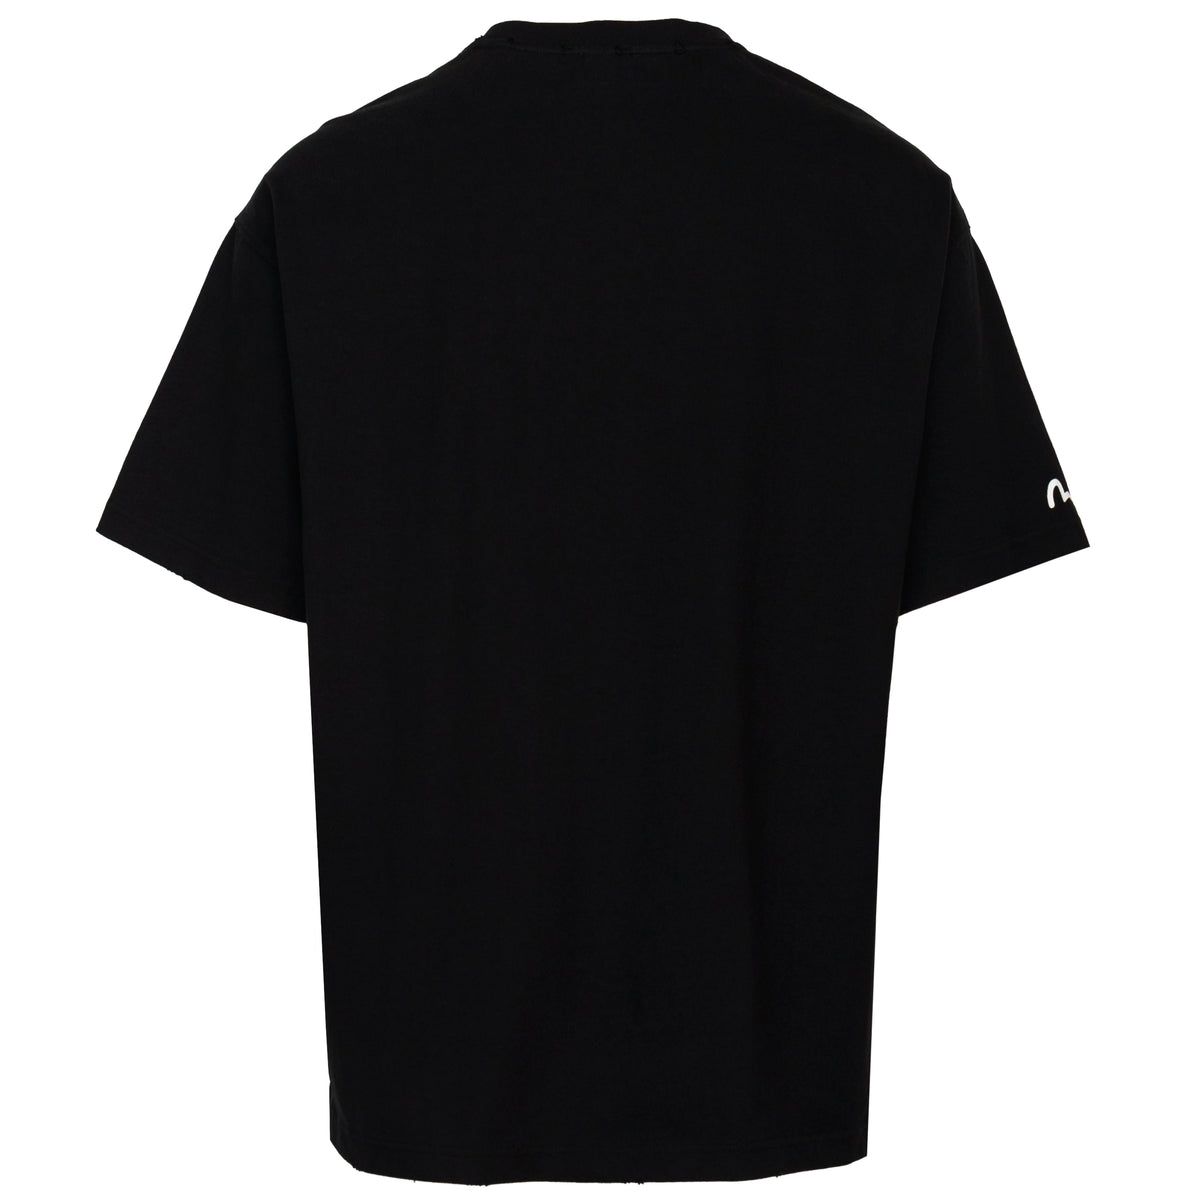 Load image into Gallery viewer, Evisu Black Loose Fit Applique Seagull Tee
